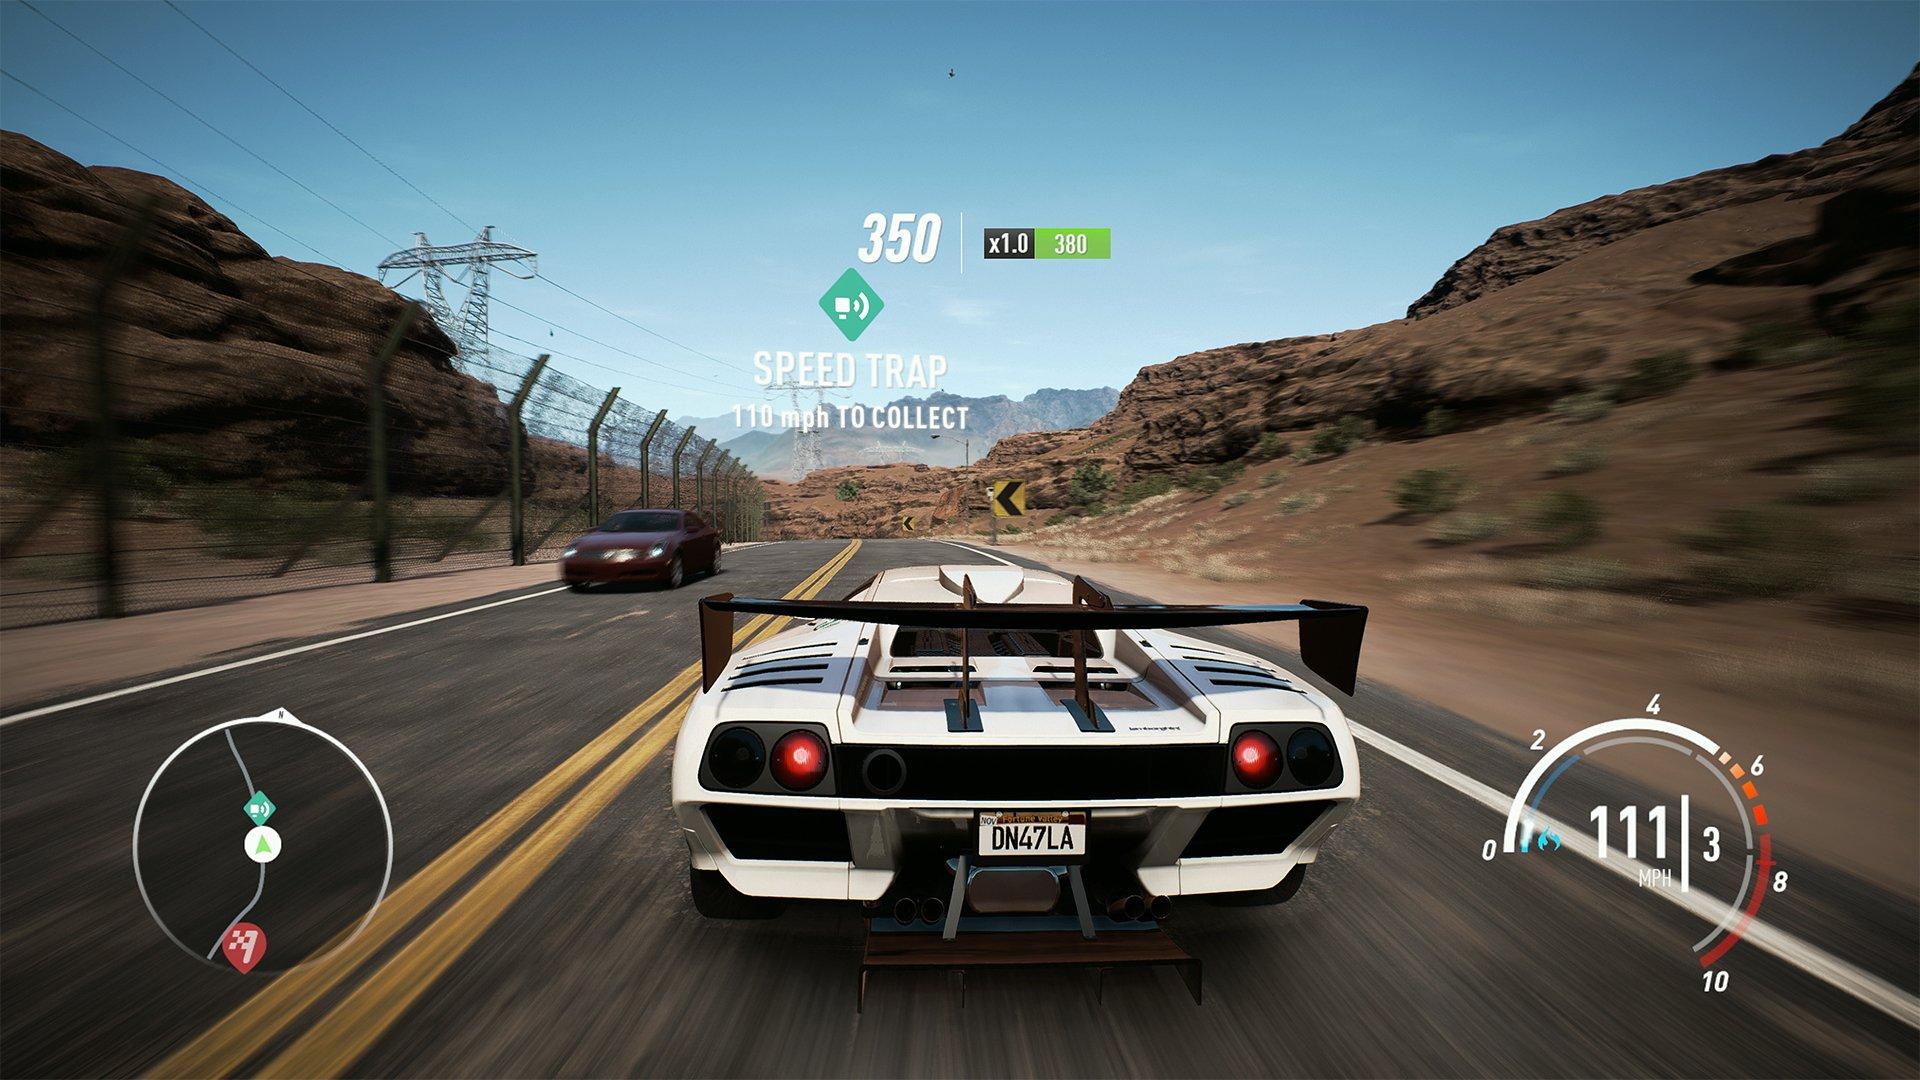 Need for Speed Payback review - Polygon